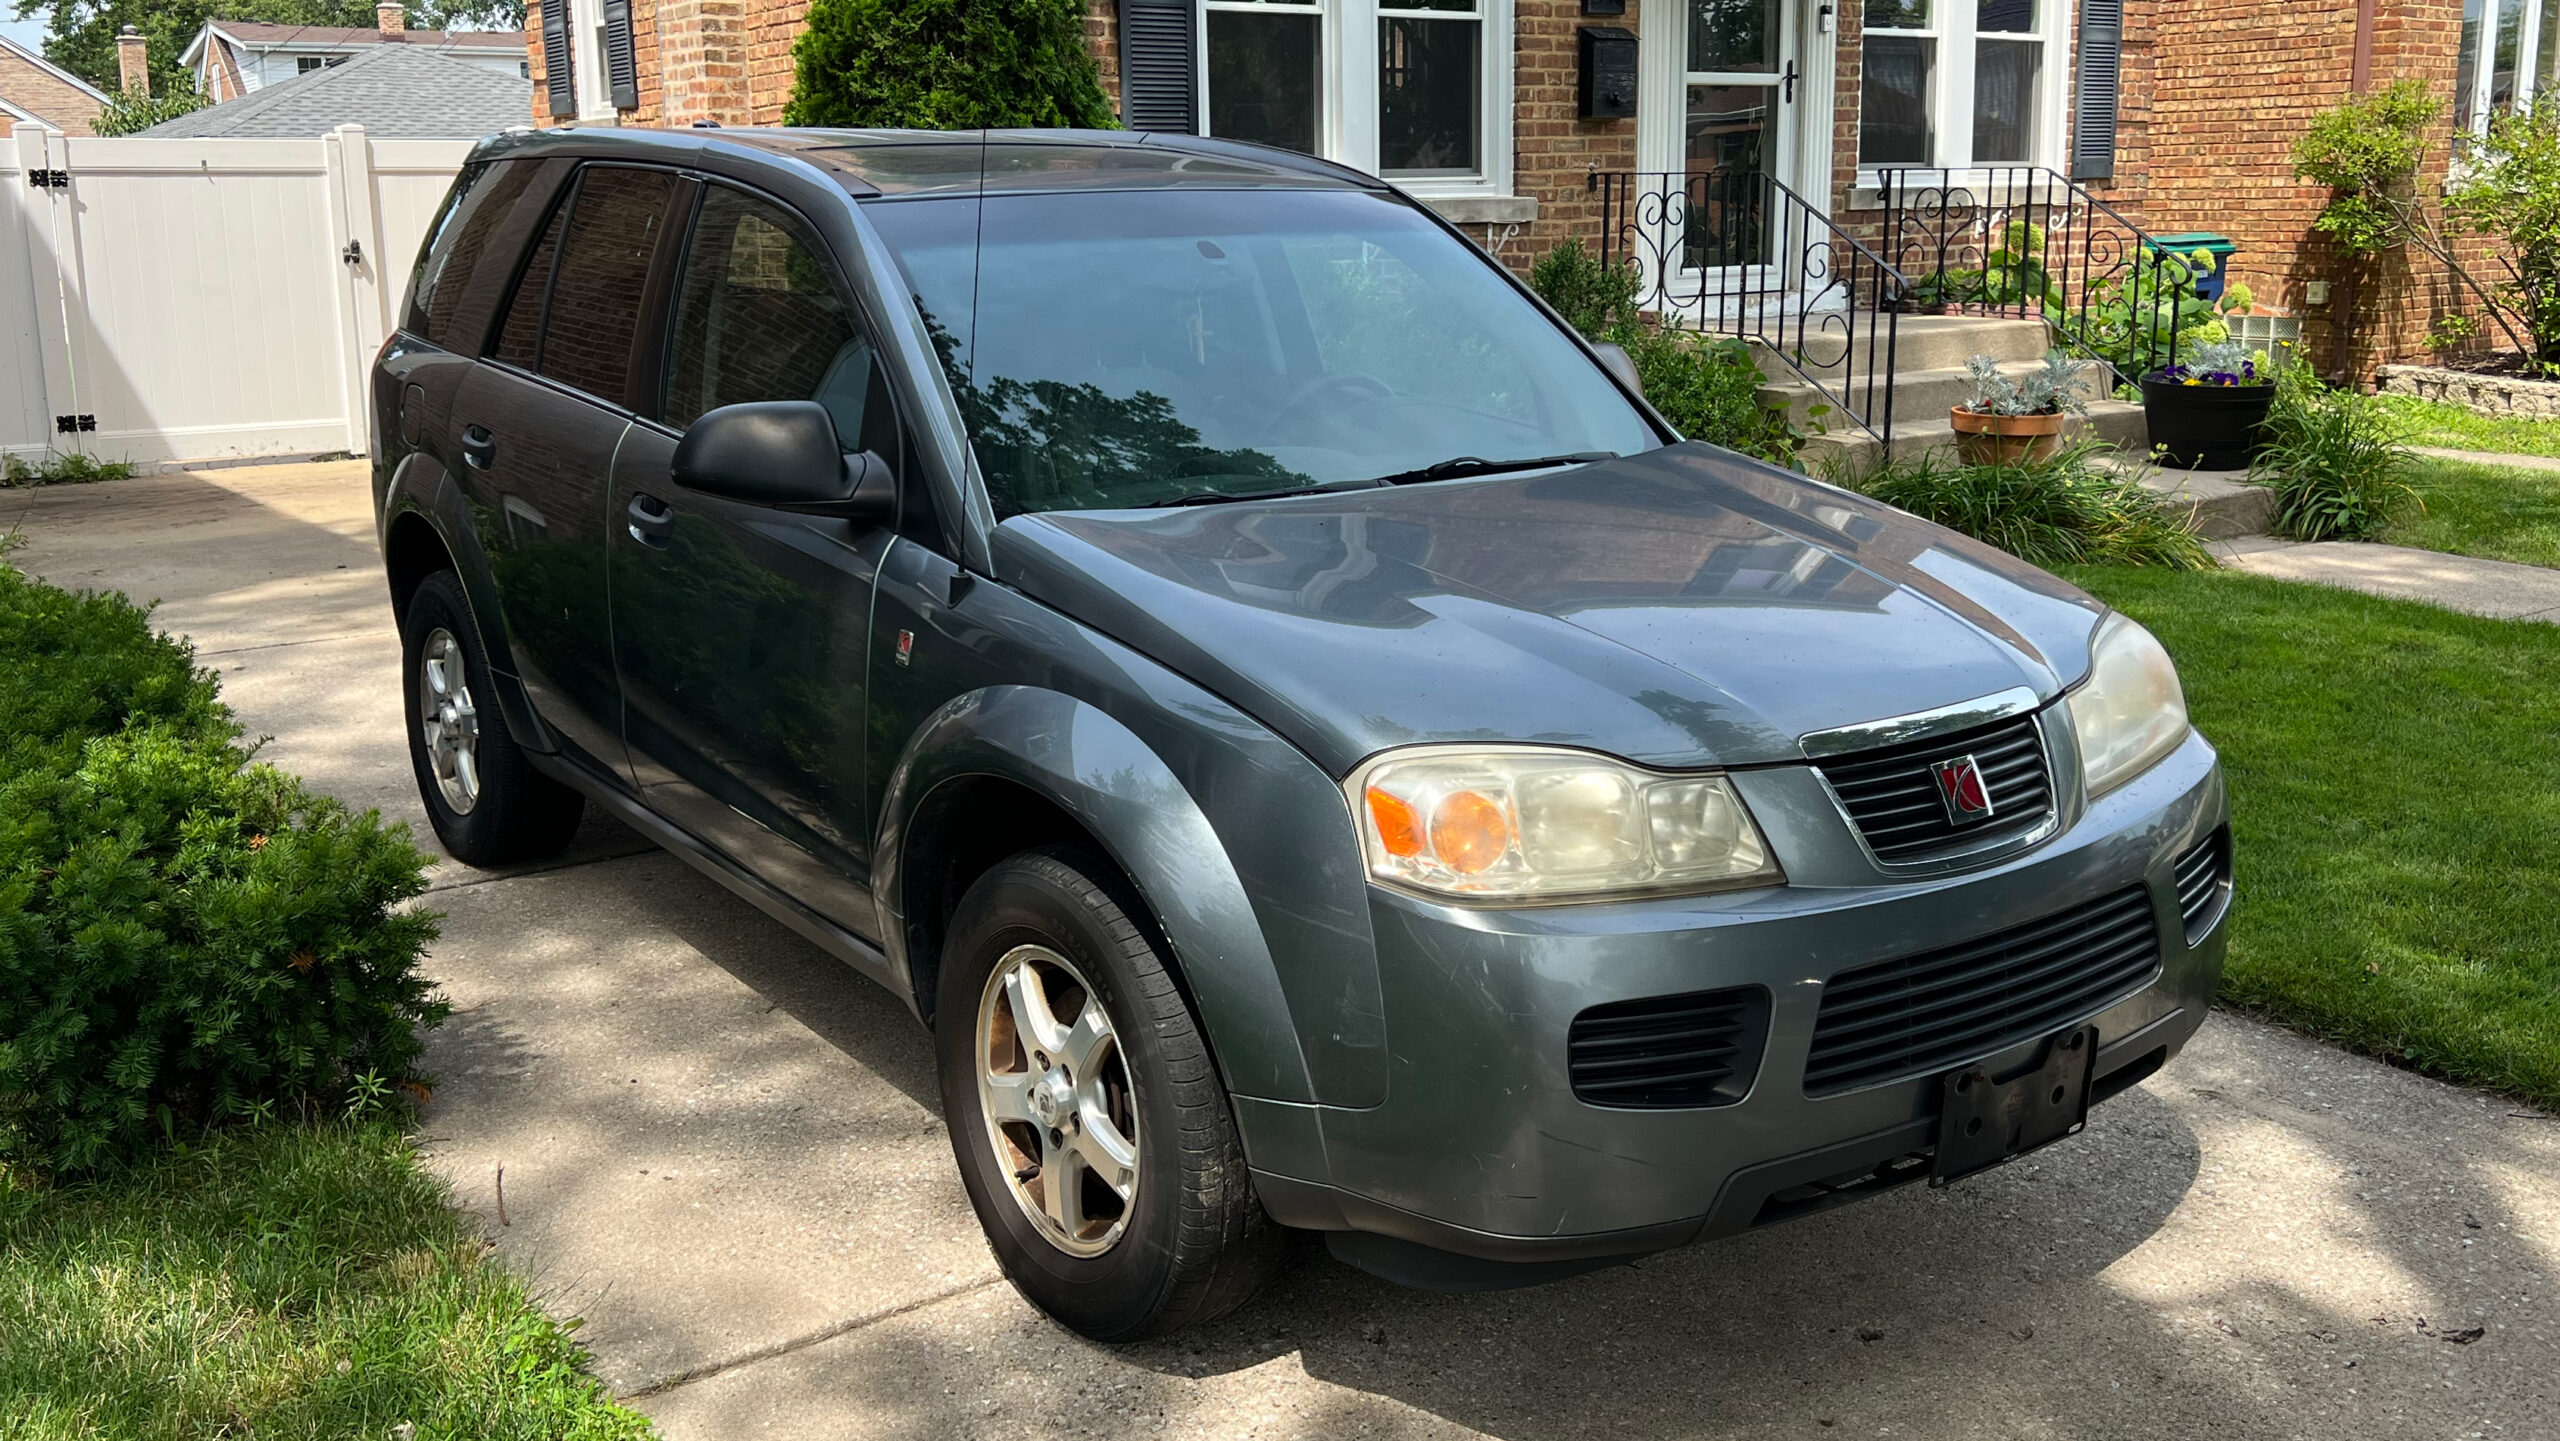 A 2006 Saturn Vue parked in a driveway.